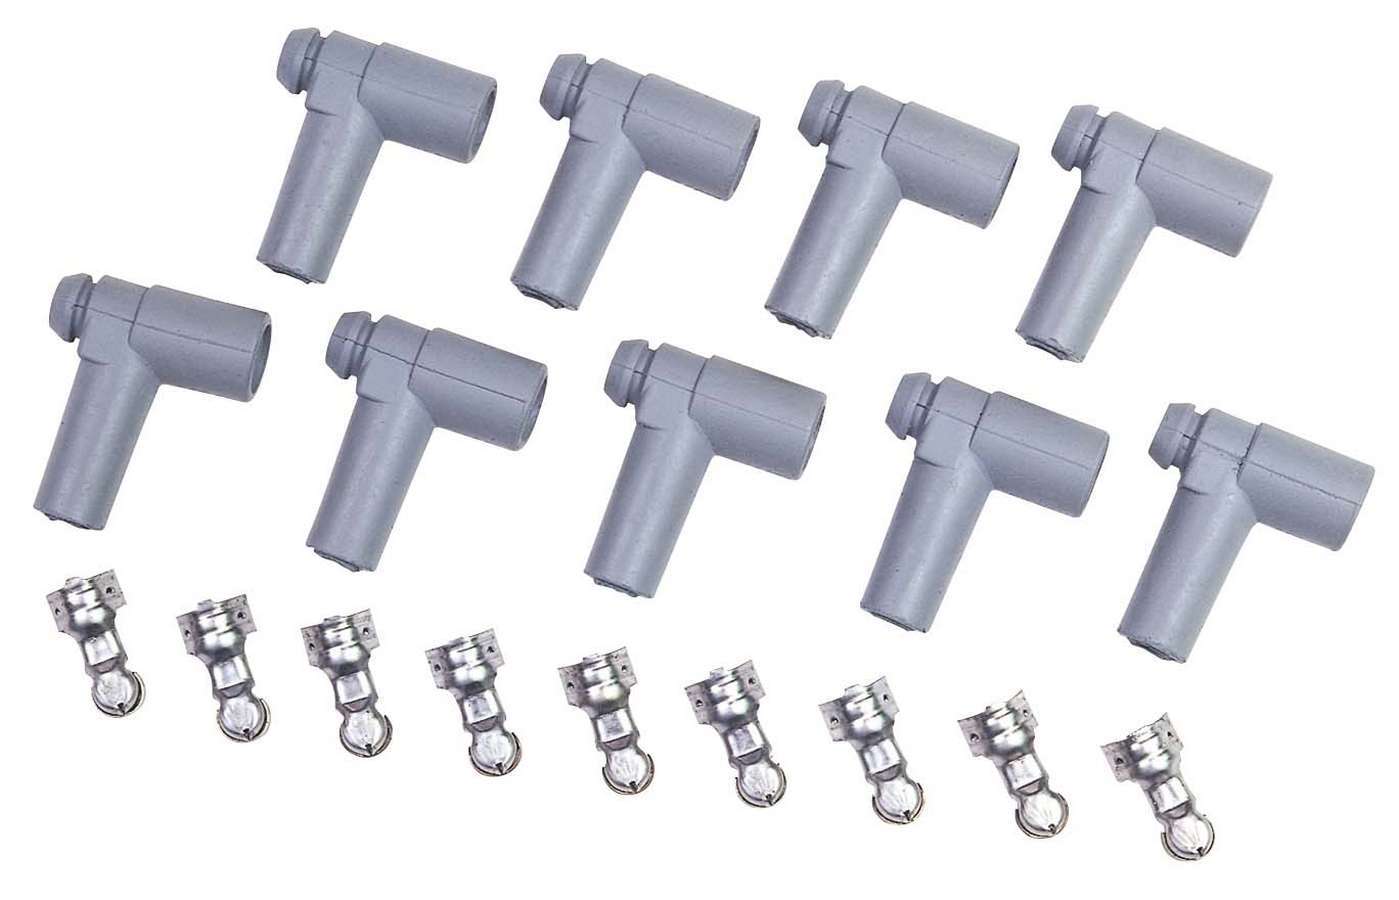 MSD Ignition 8849 Boot / Terminal Kit, Distributor / Coil, 8.5 mm, Gray, 90 Degree, HEI Style Terminal, Set of 9